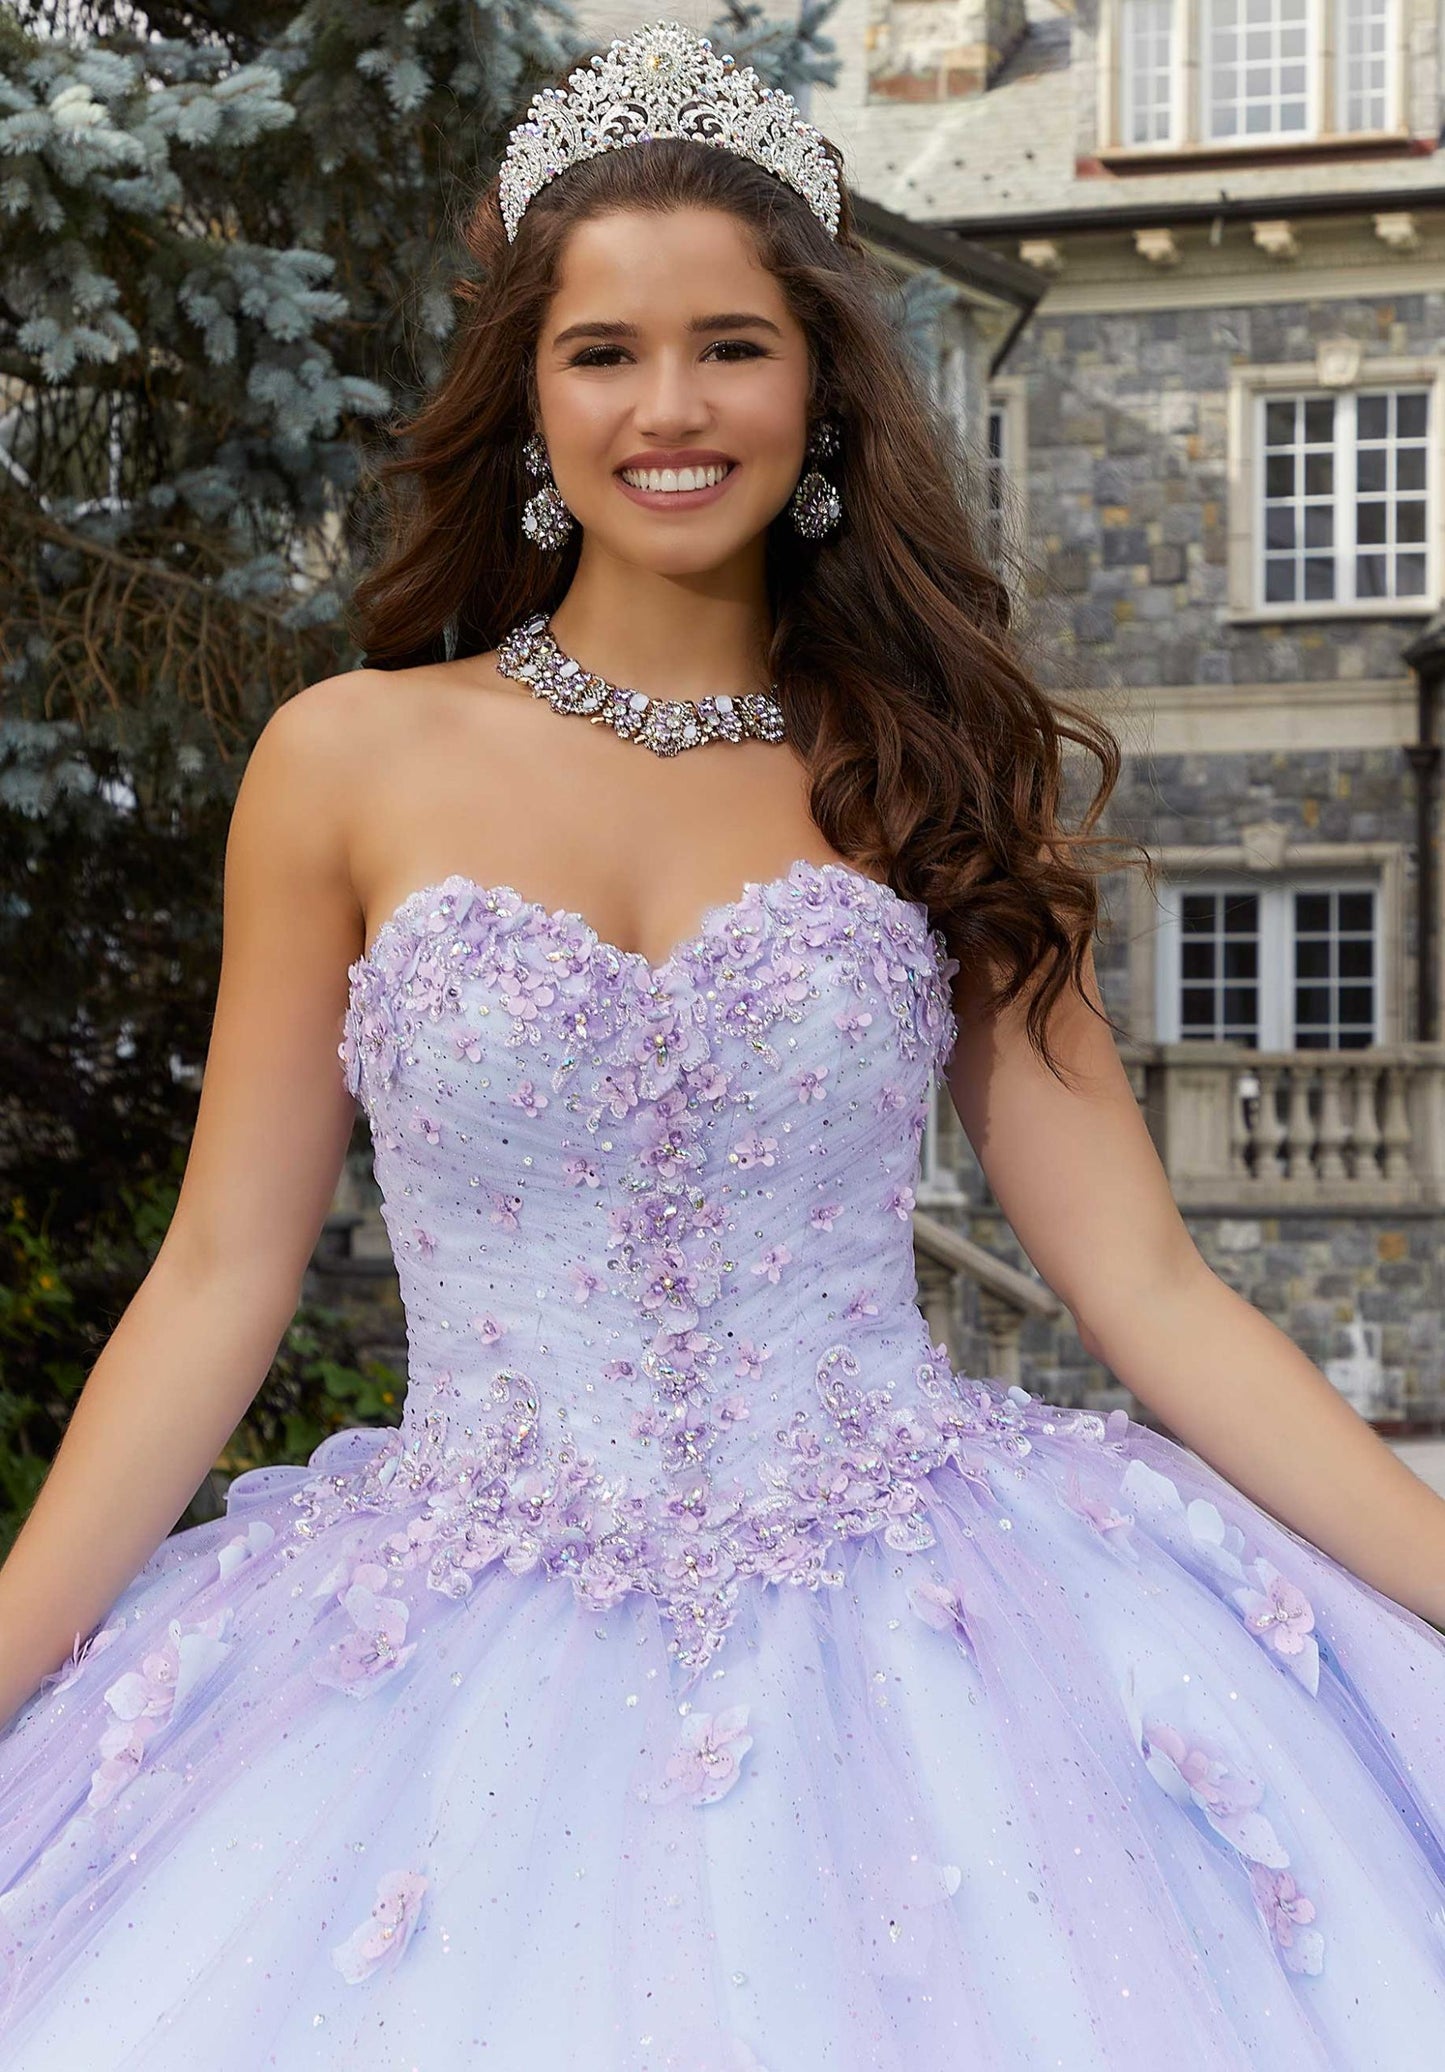 Glitter Tulle Quinceañera Dress with Three-Dimensional Floral Appliqués#60174